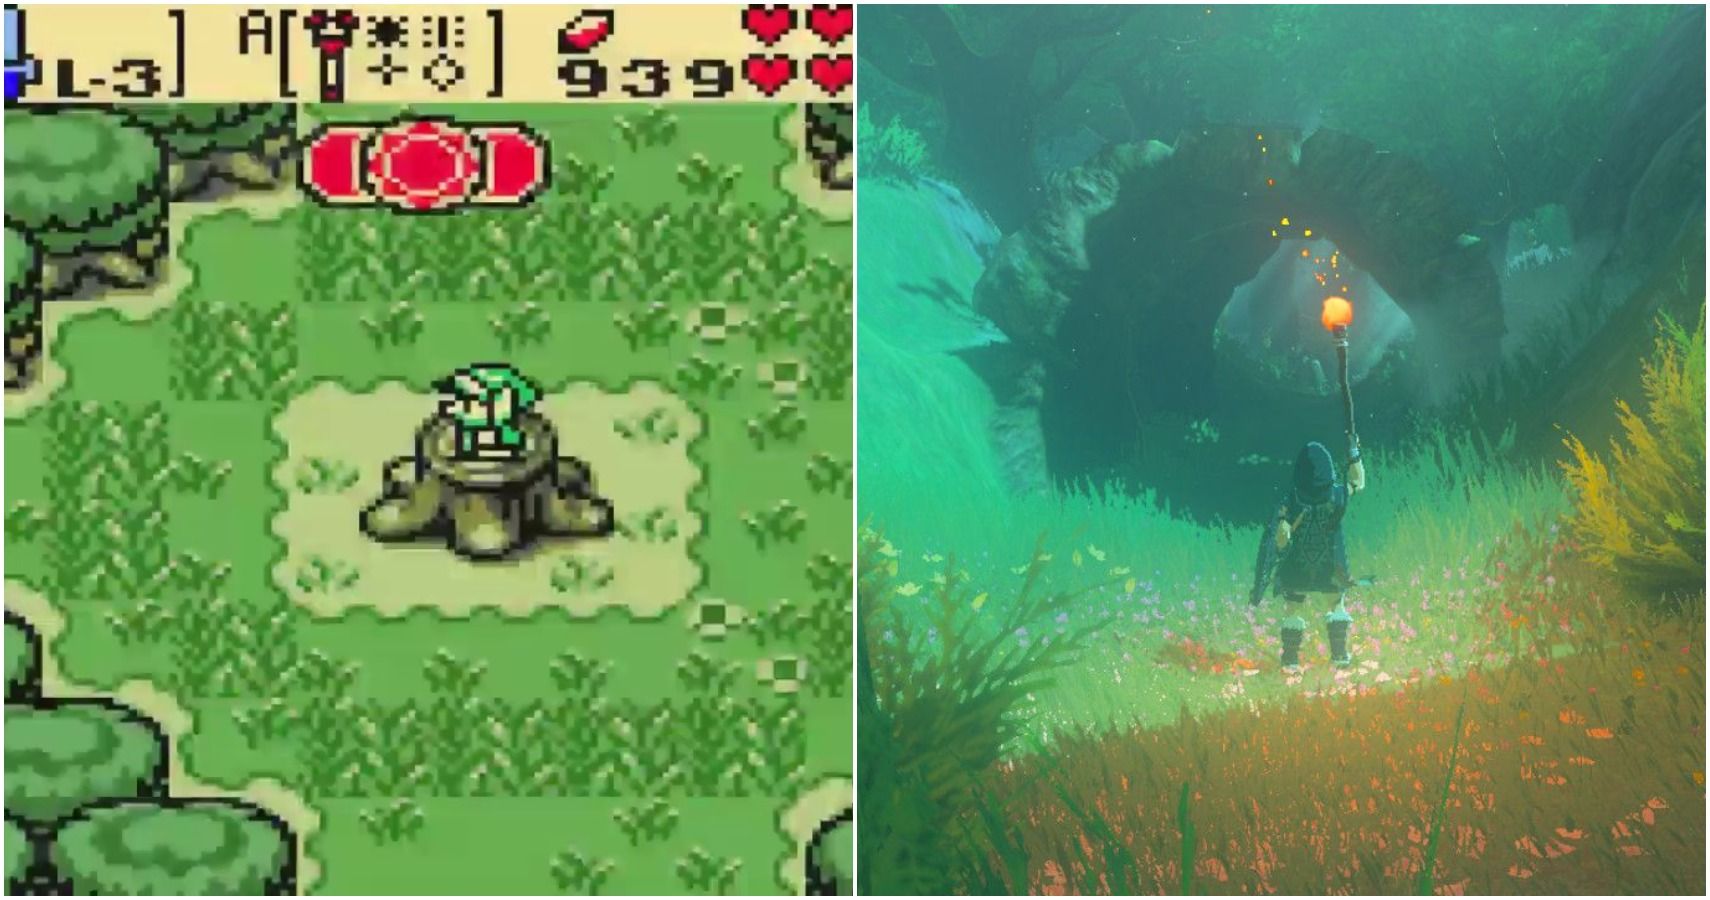 zelda-every-appearance-of-the-lost-woods-ranked